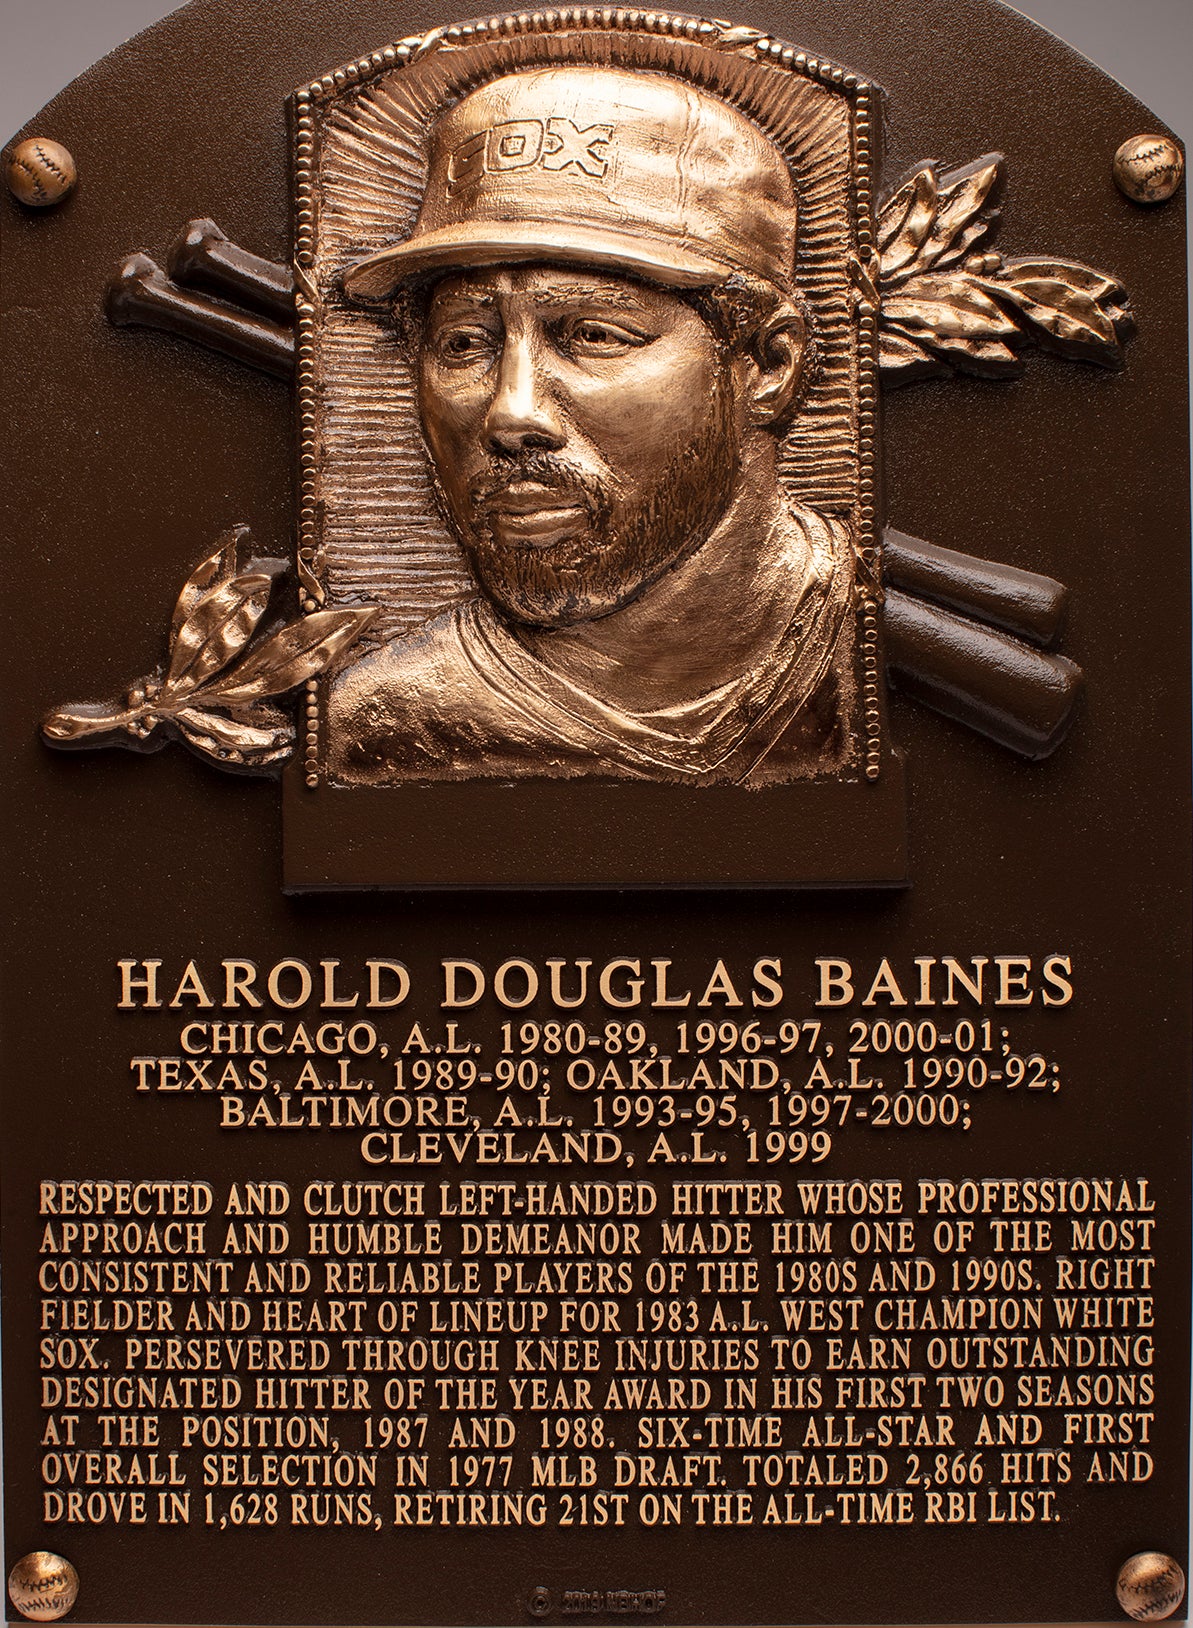 Harold Baines Hall of Fame plaque